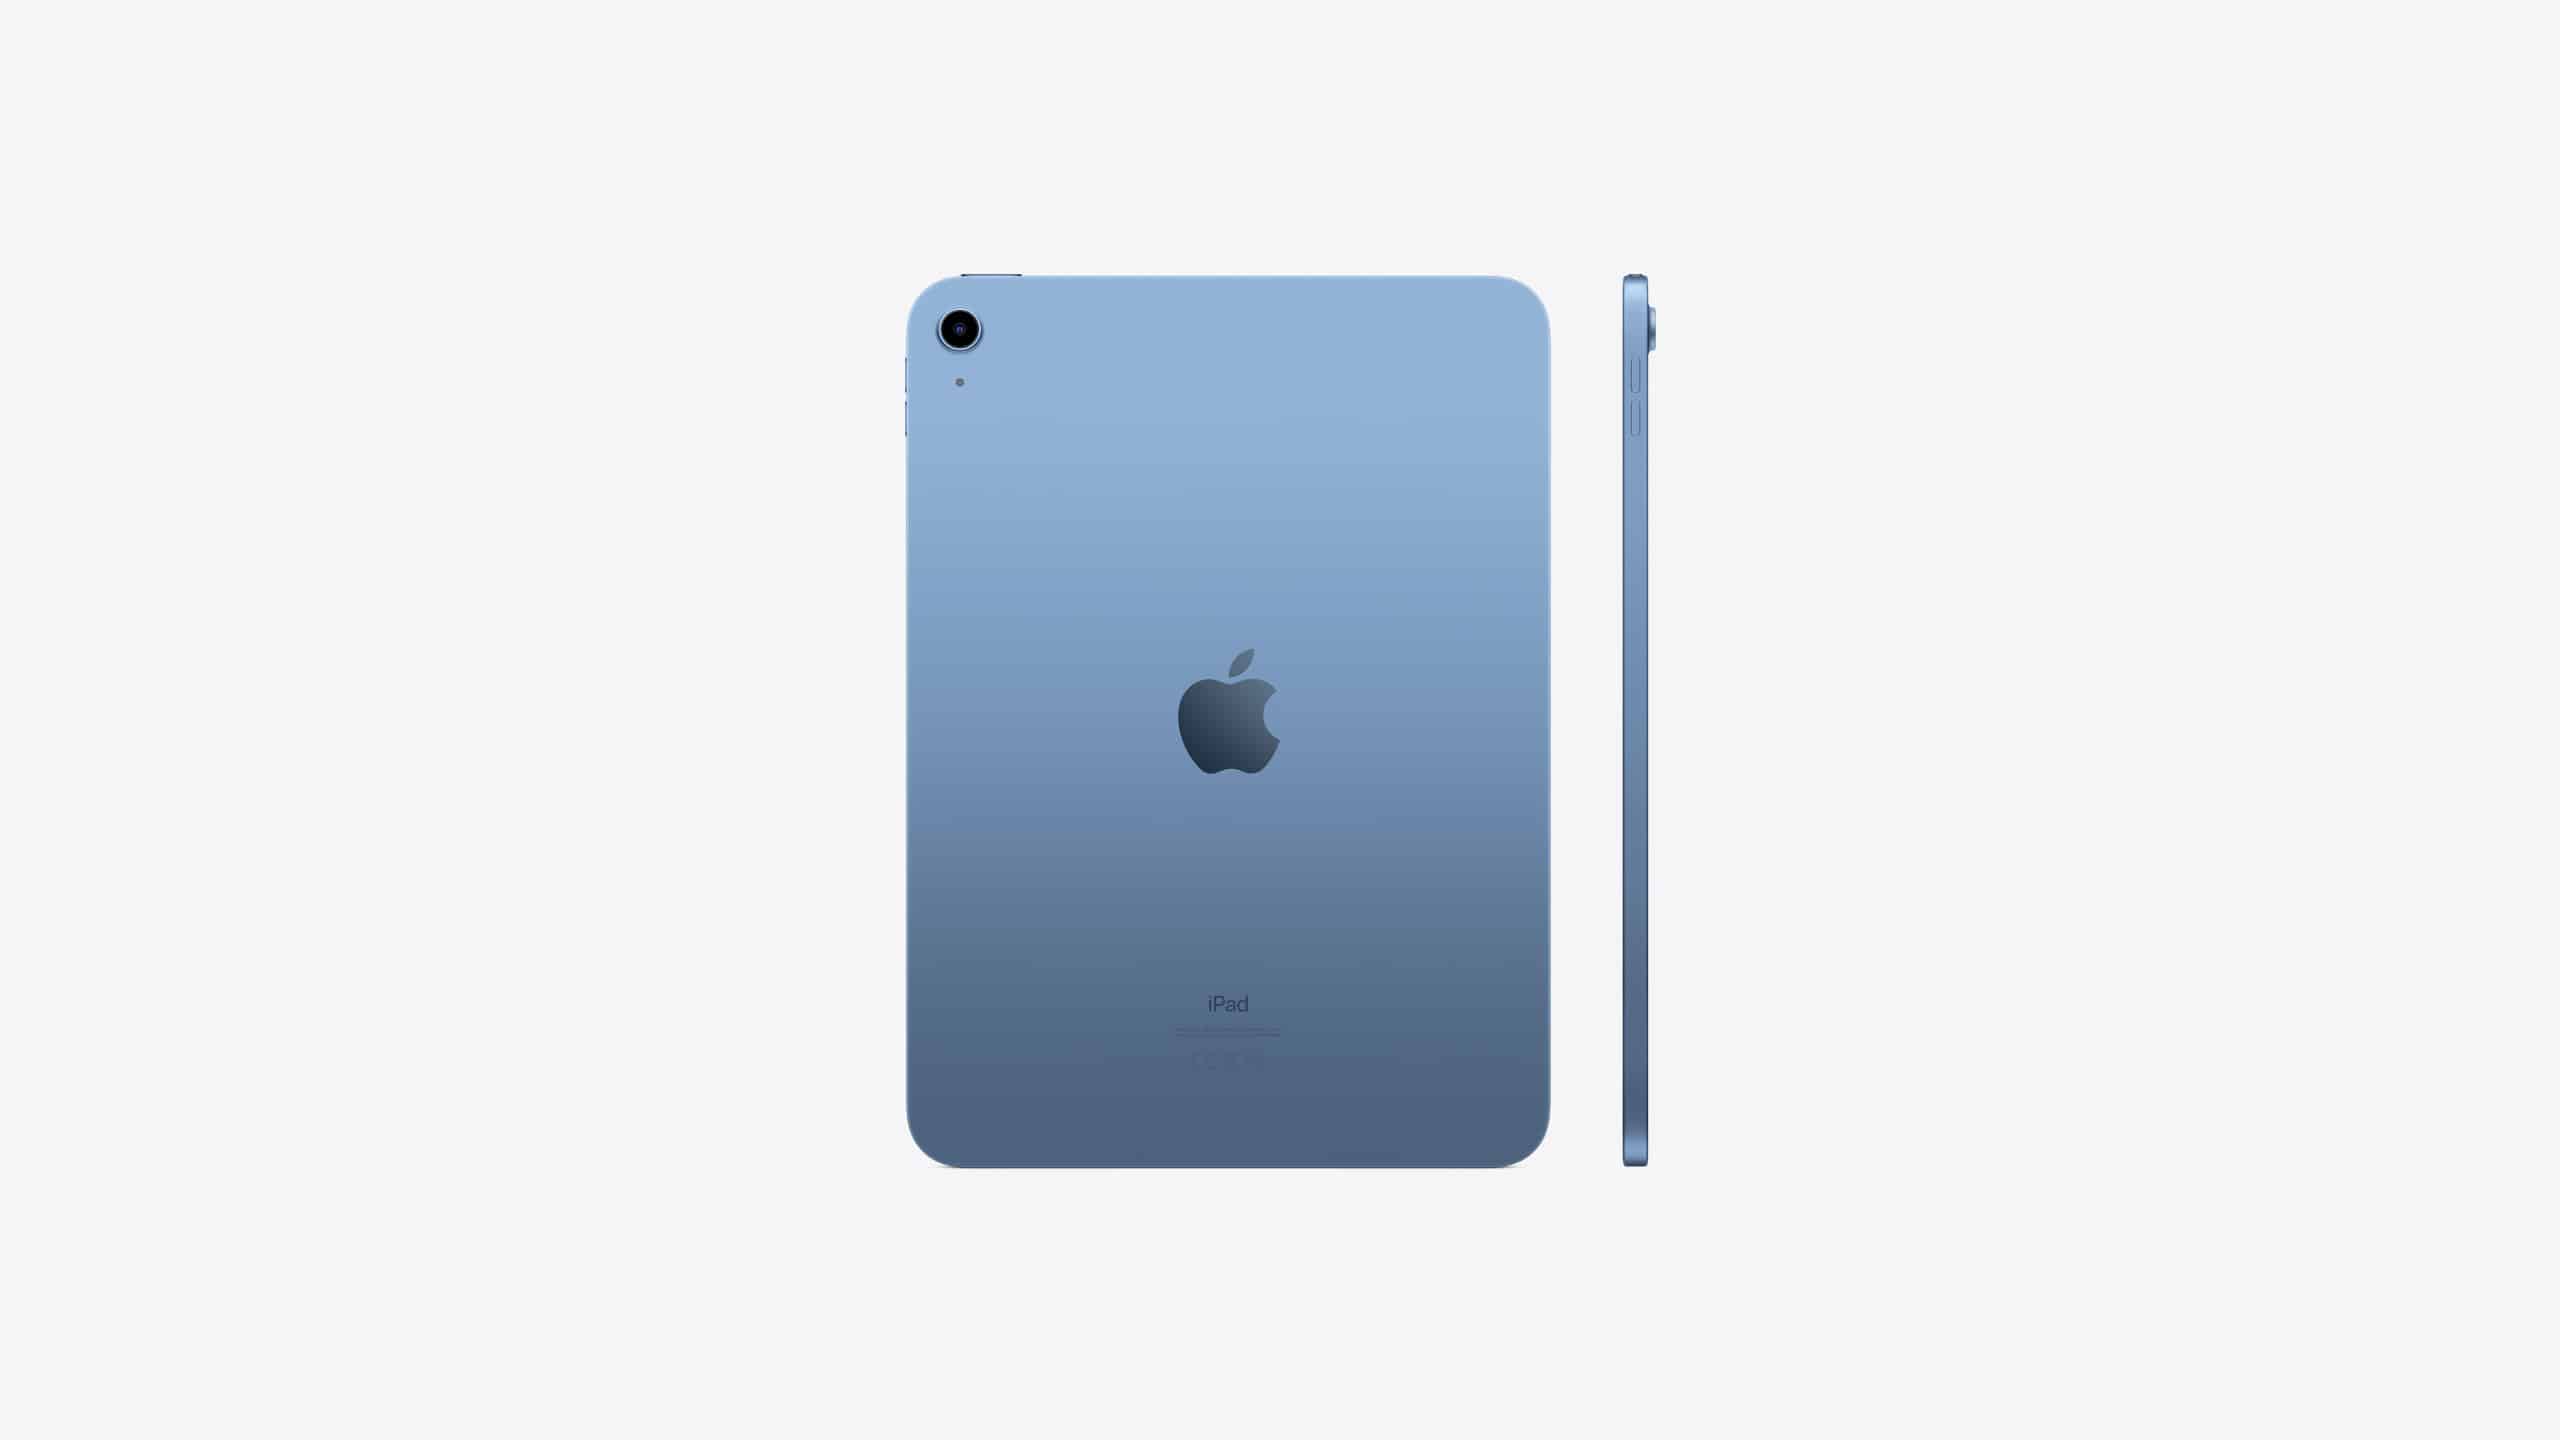 Apple's redesigned iPad Air sports 10.9-inch display, A14 Bionic chip